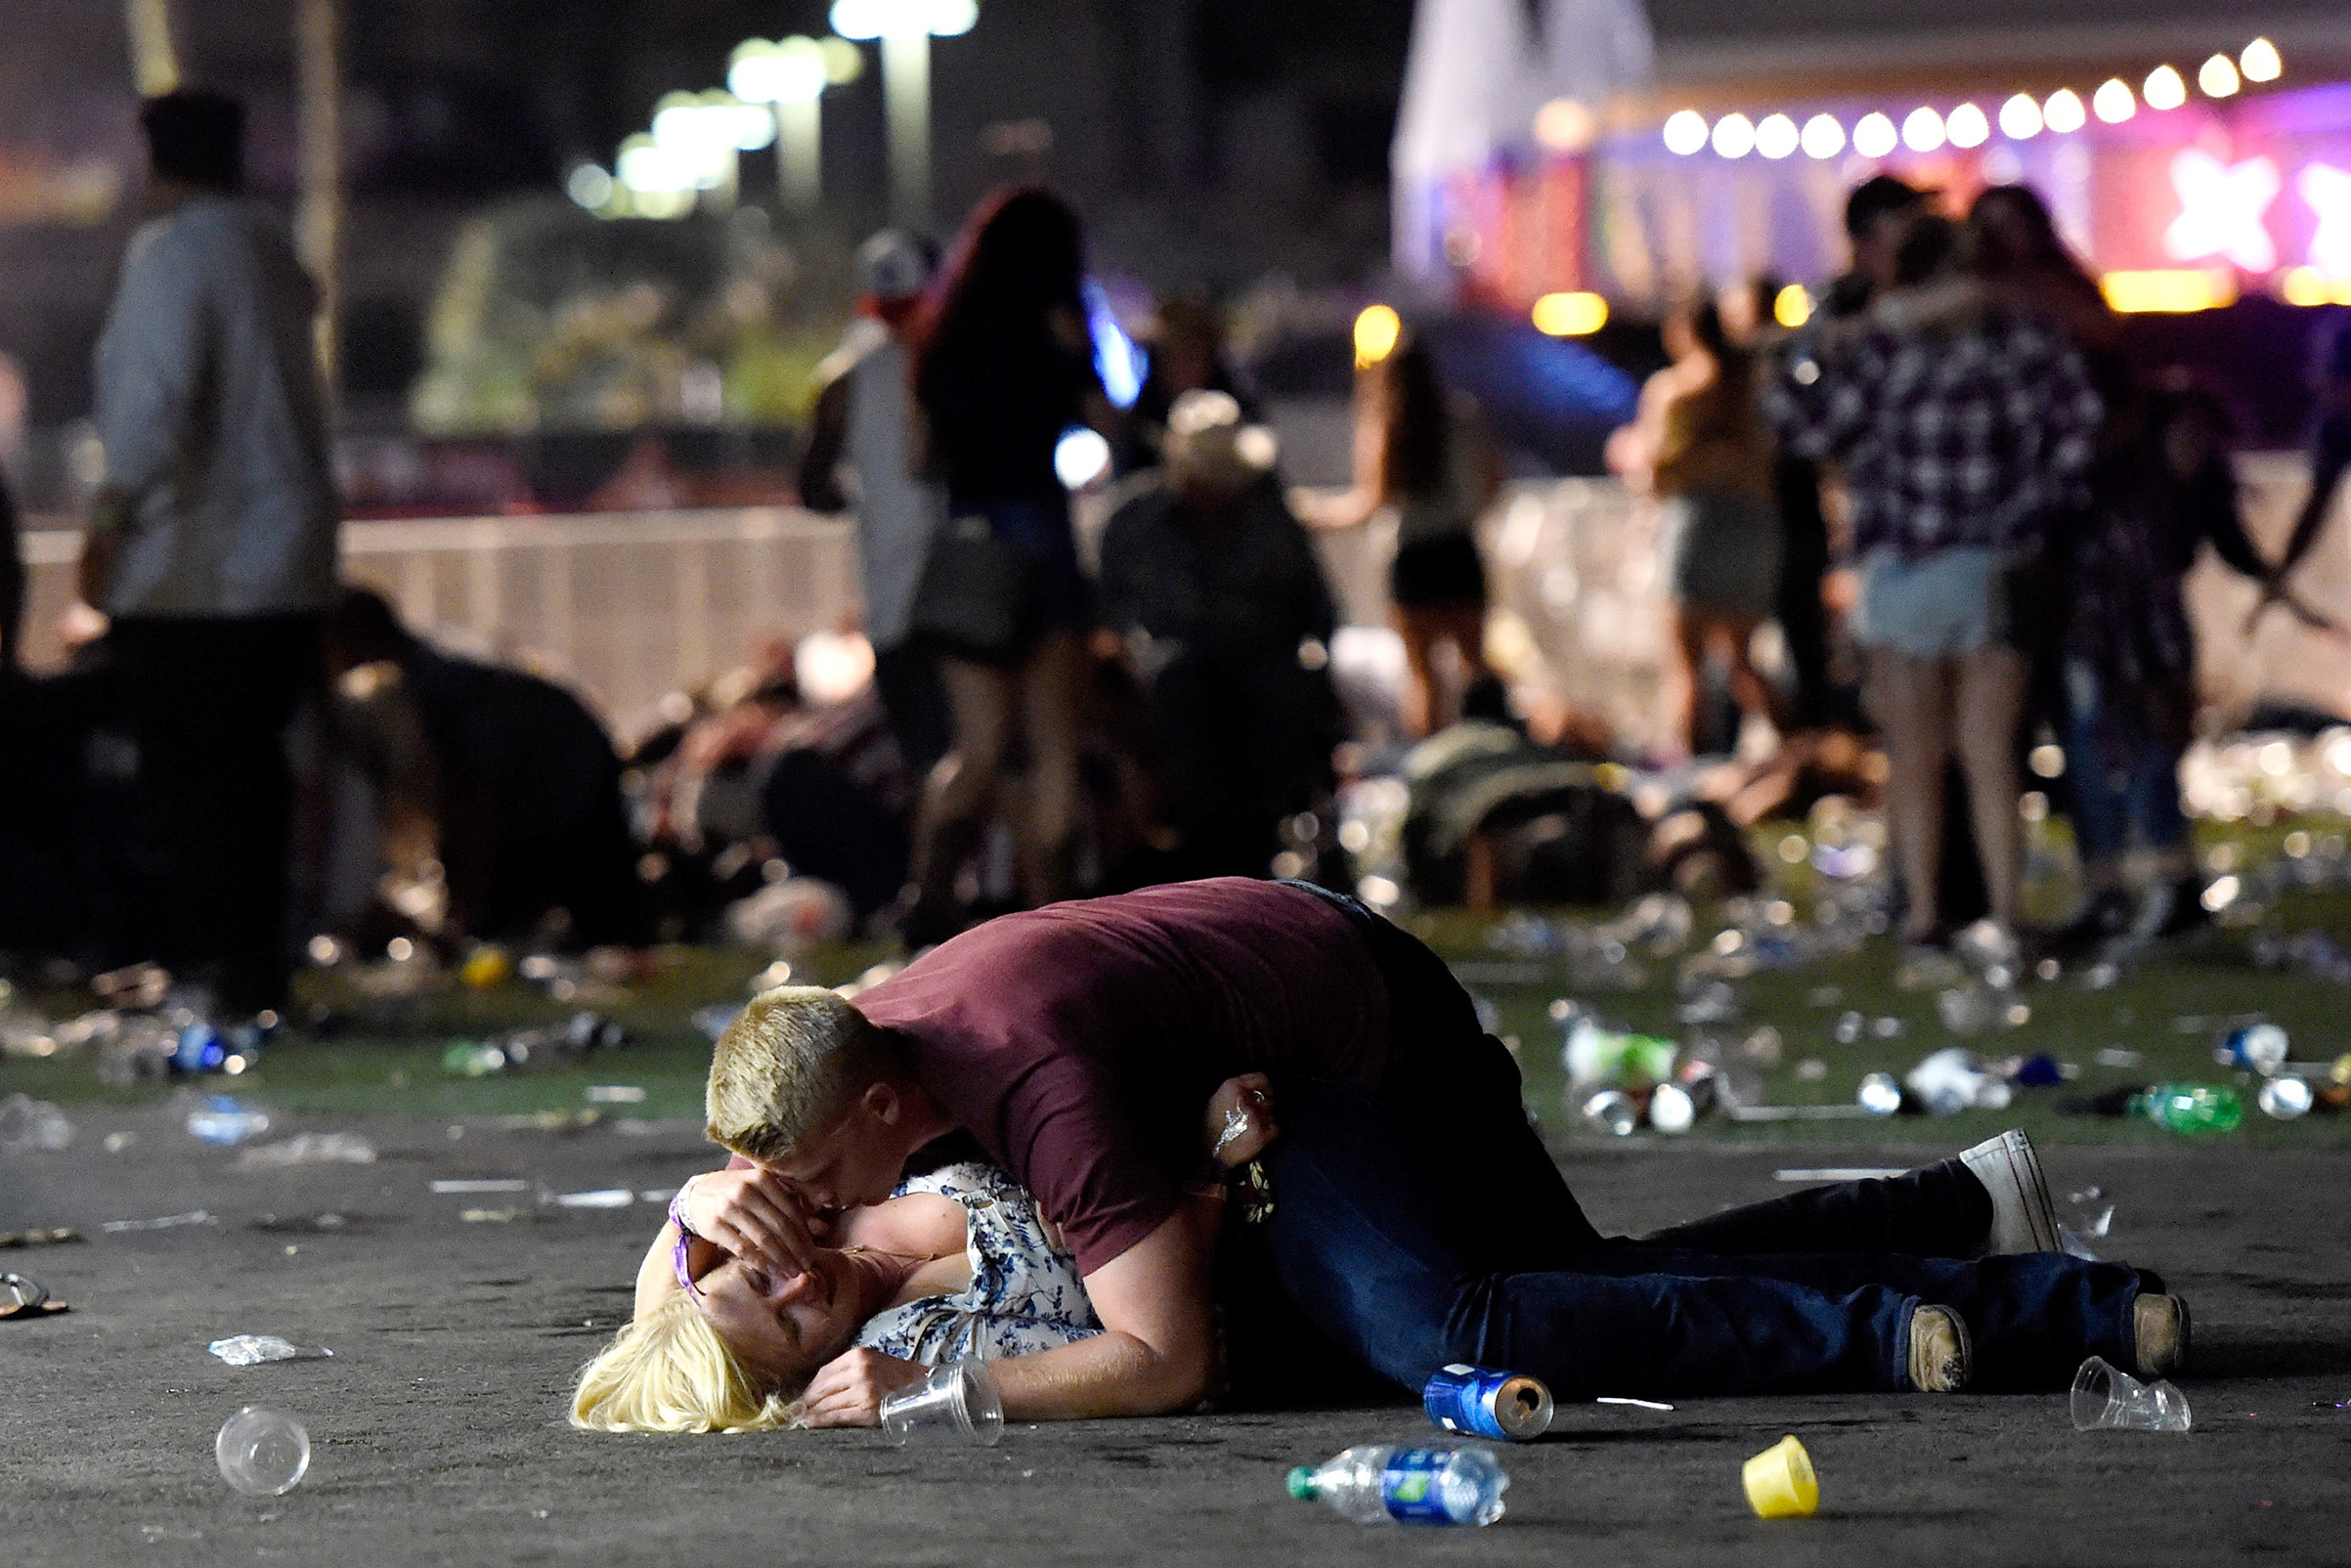 A man lays on top of a woman as others flee the Route 91 Harvest country music festival grounds after a active shooter was reported at Mandalay Bay on Oct. 1, 2017 in Las Vegas. (David Becker/Getty Images)